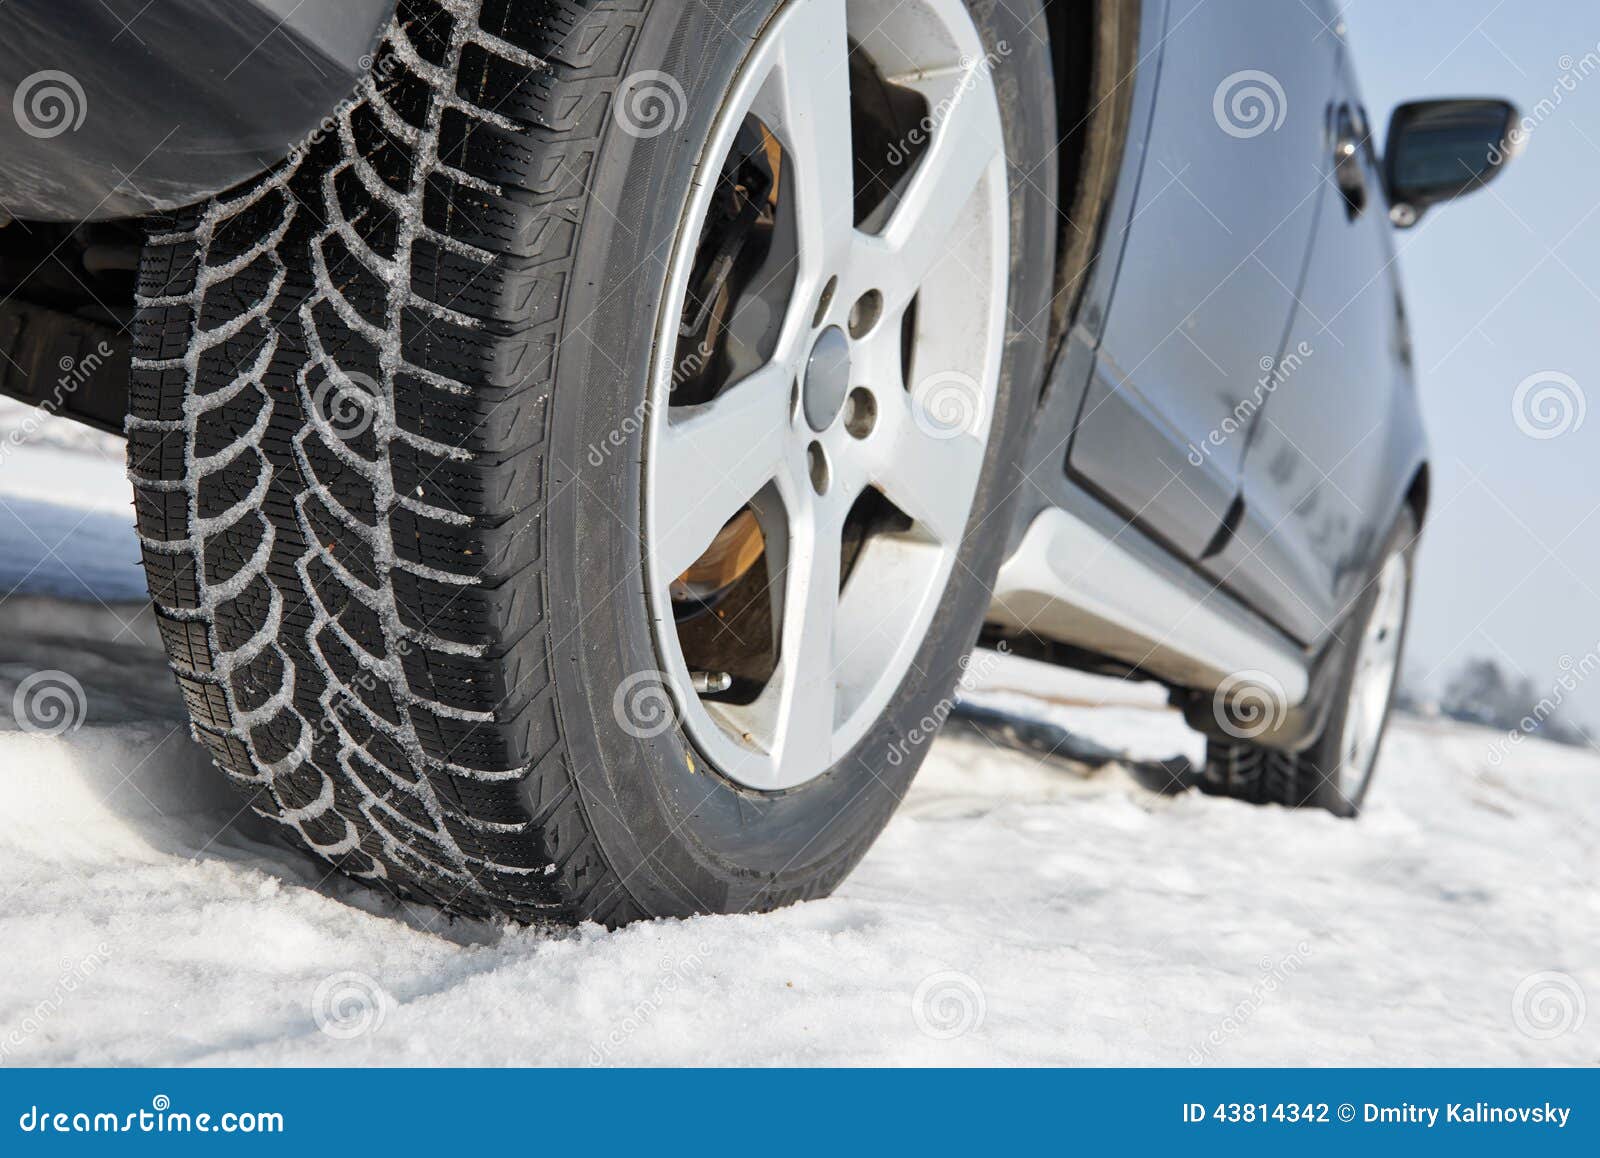 winter tyres wheels installed on suv car outdoors